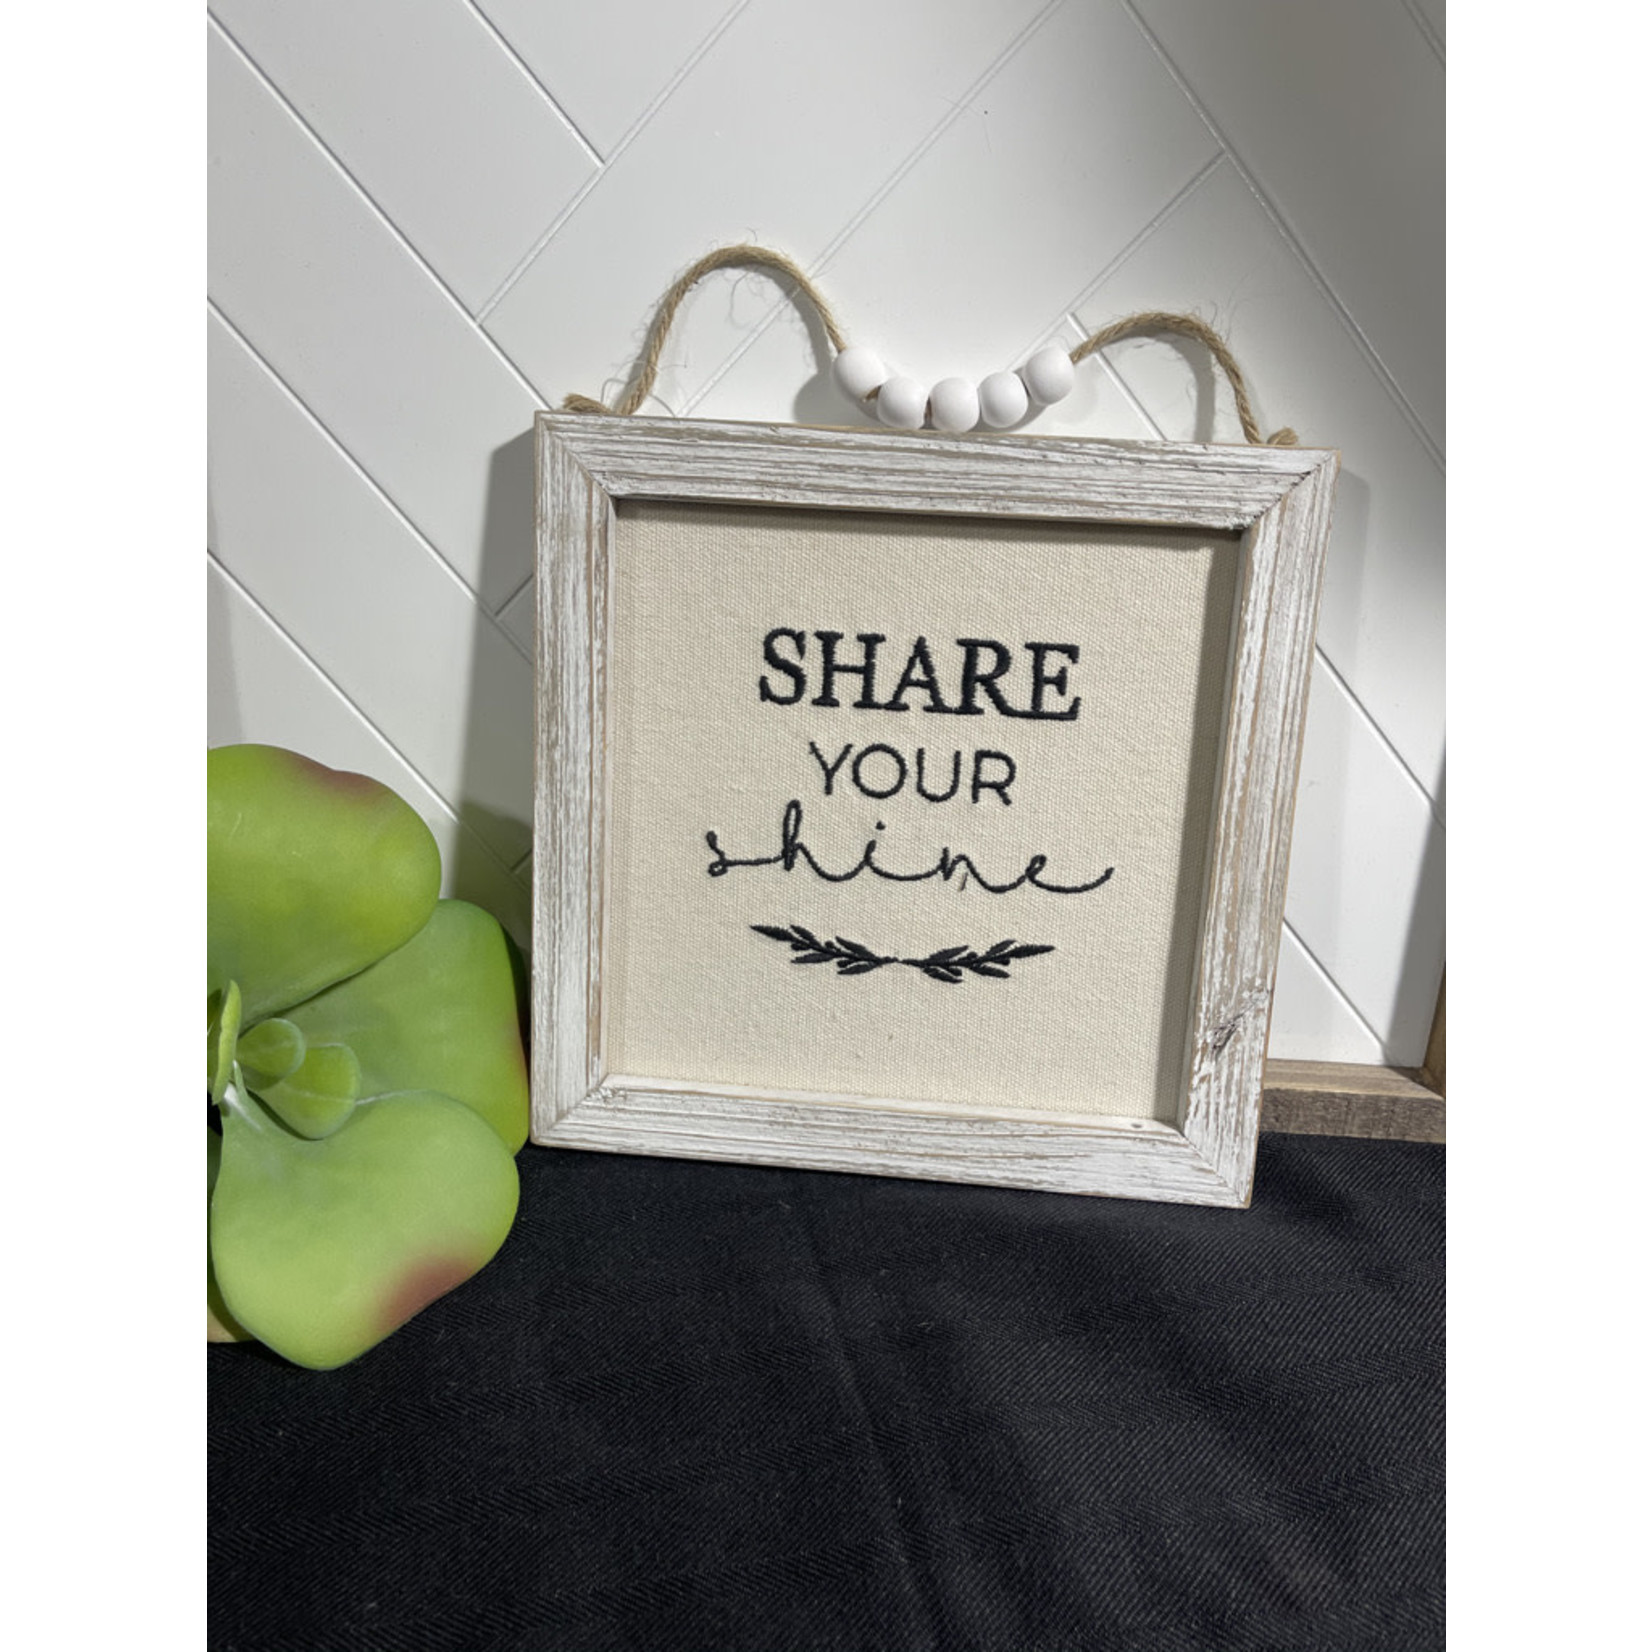 Framed Embroidered Hanging "Share Your Shine"